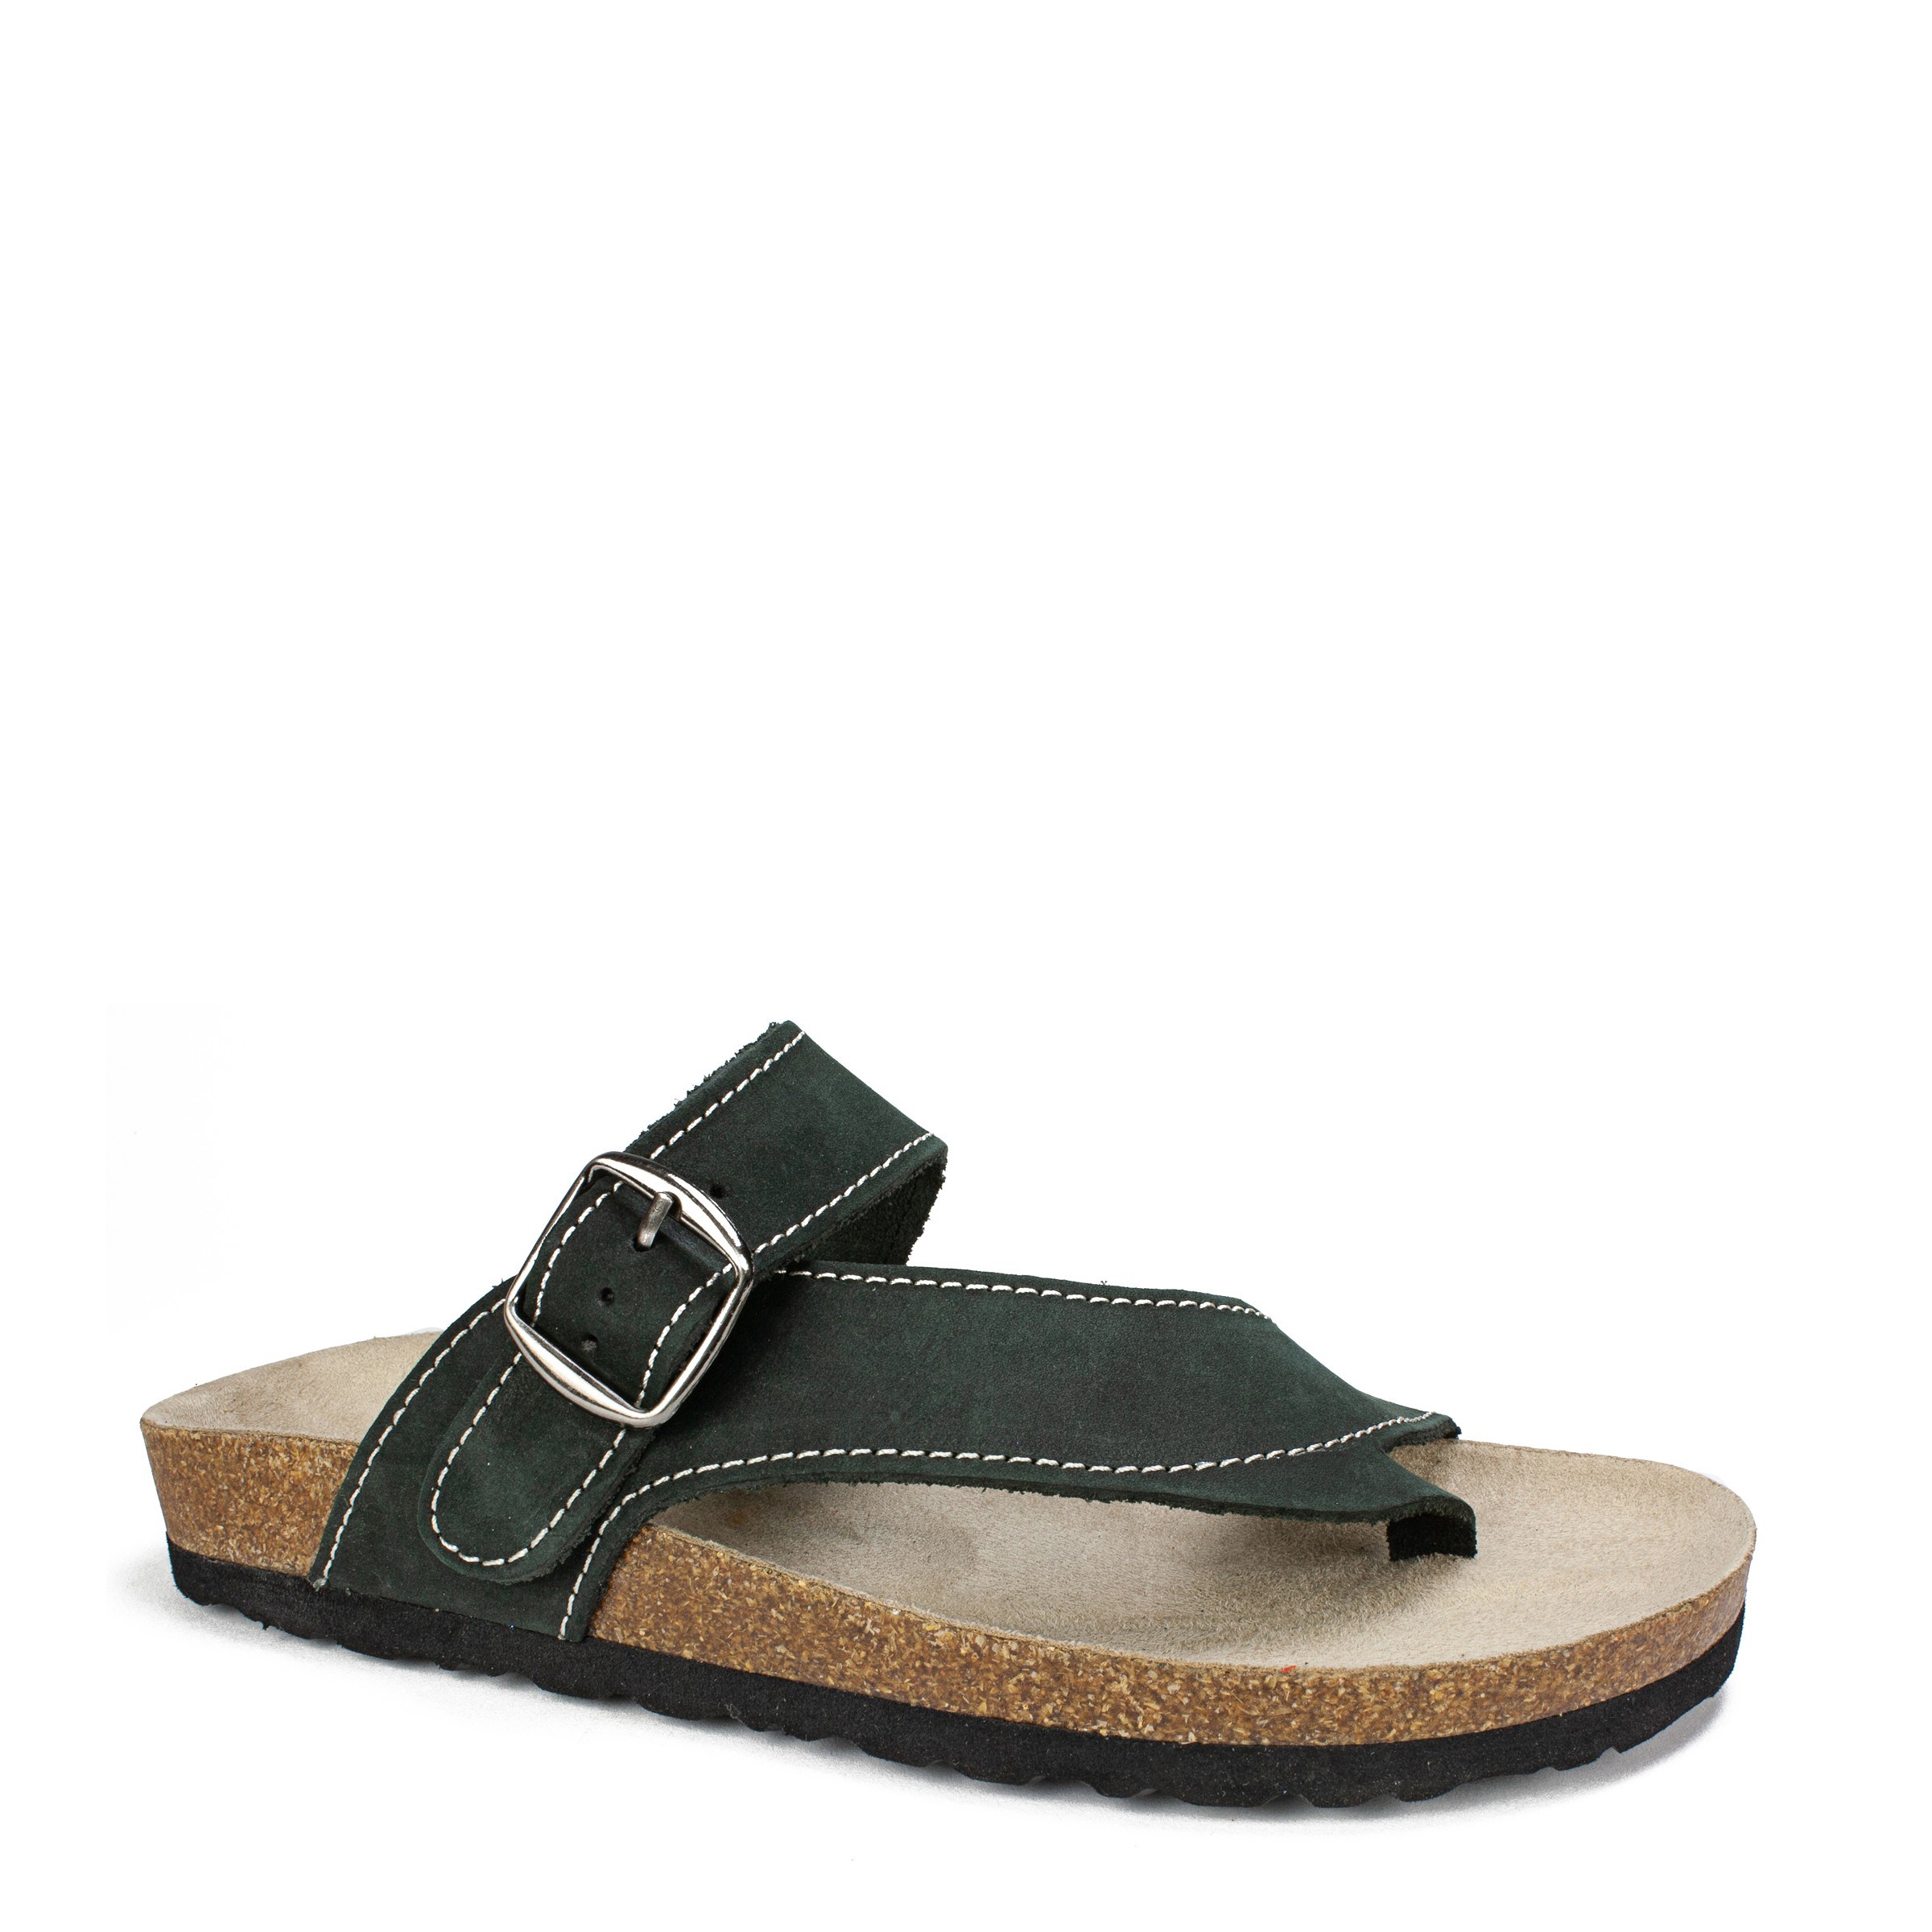 White Mountain Sandals Famous Footwear 